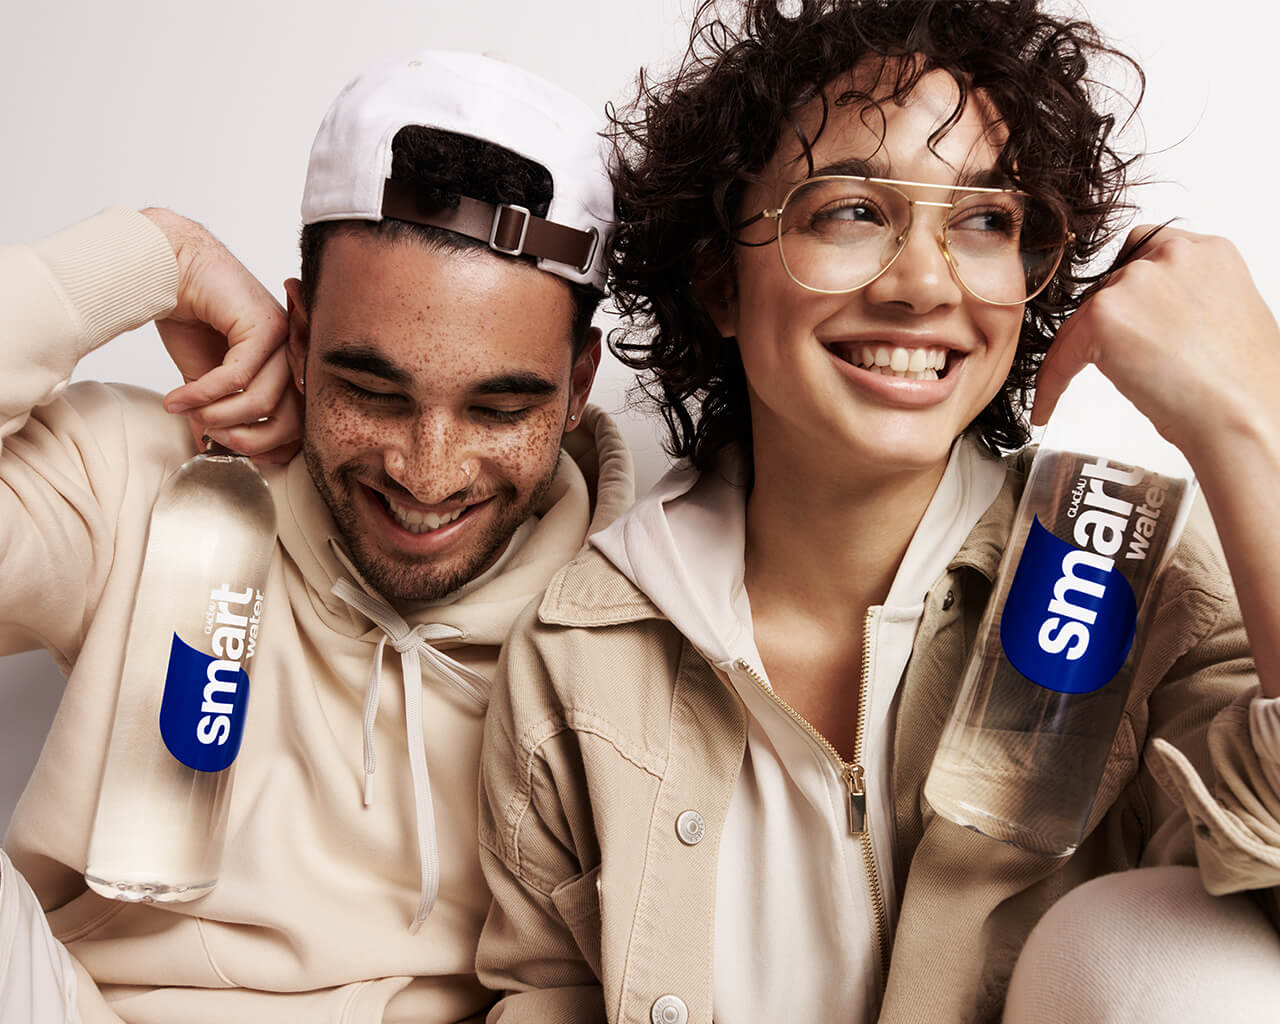 A man and woman smiling while holding bottles of smartwater.